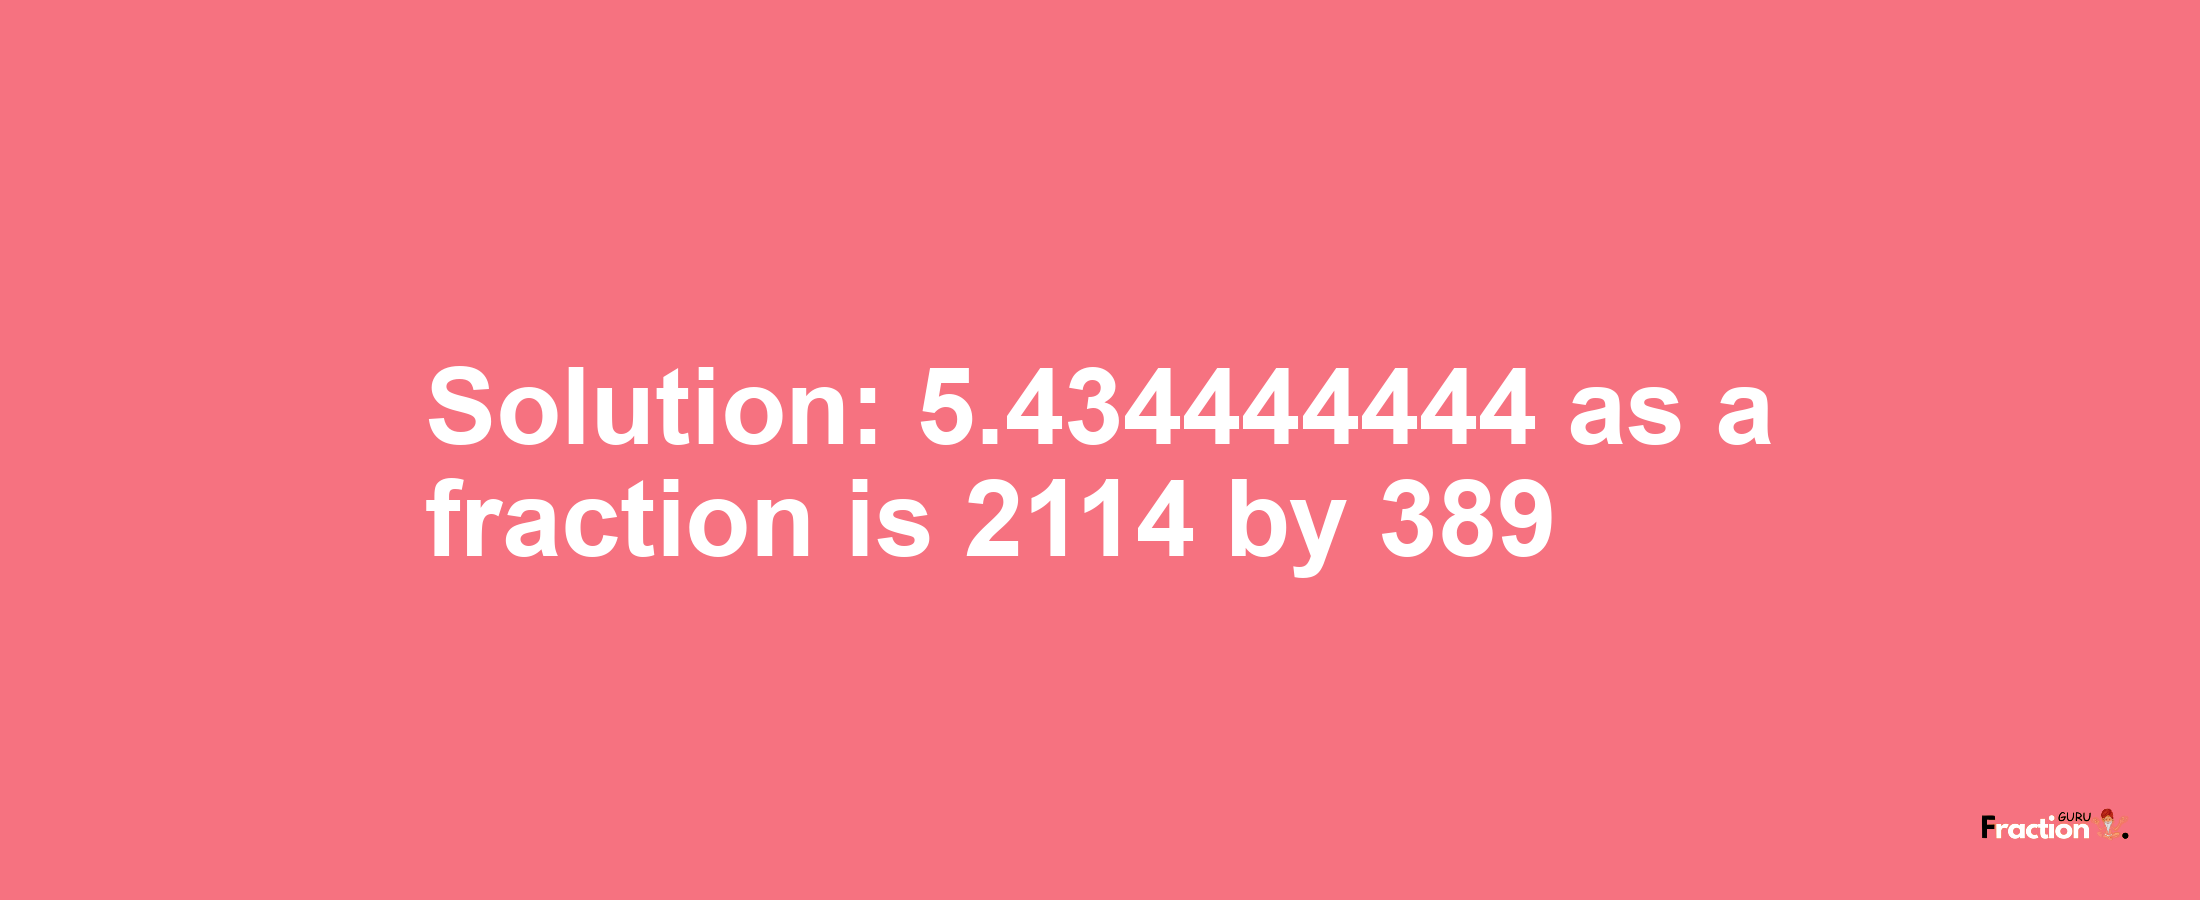 Solution:5.434444444 as a fraction is 2114/389